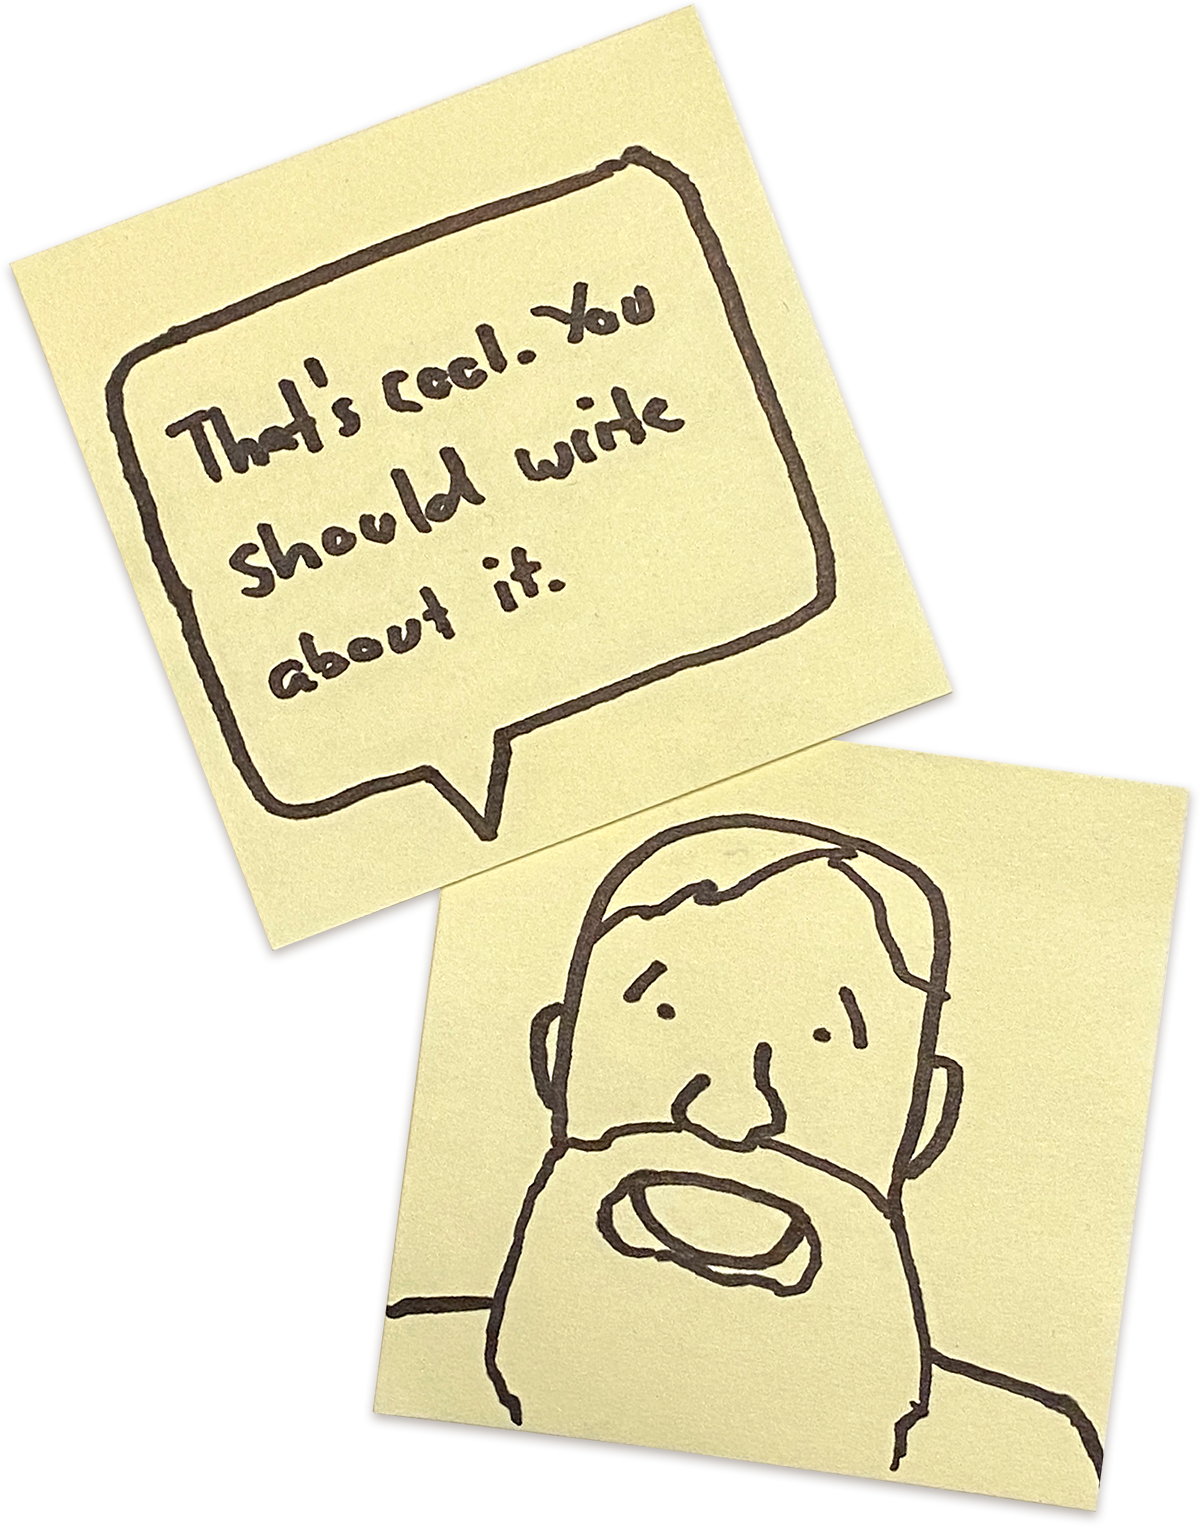 A simple Sharpie illustration of Mike on two sticky notes. One sticky note displays his face, and the second is a speech bubble that reads, “That’s cool. You should write about it.”